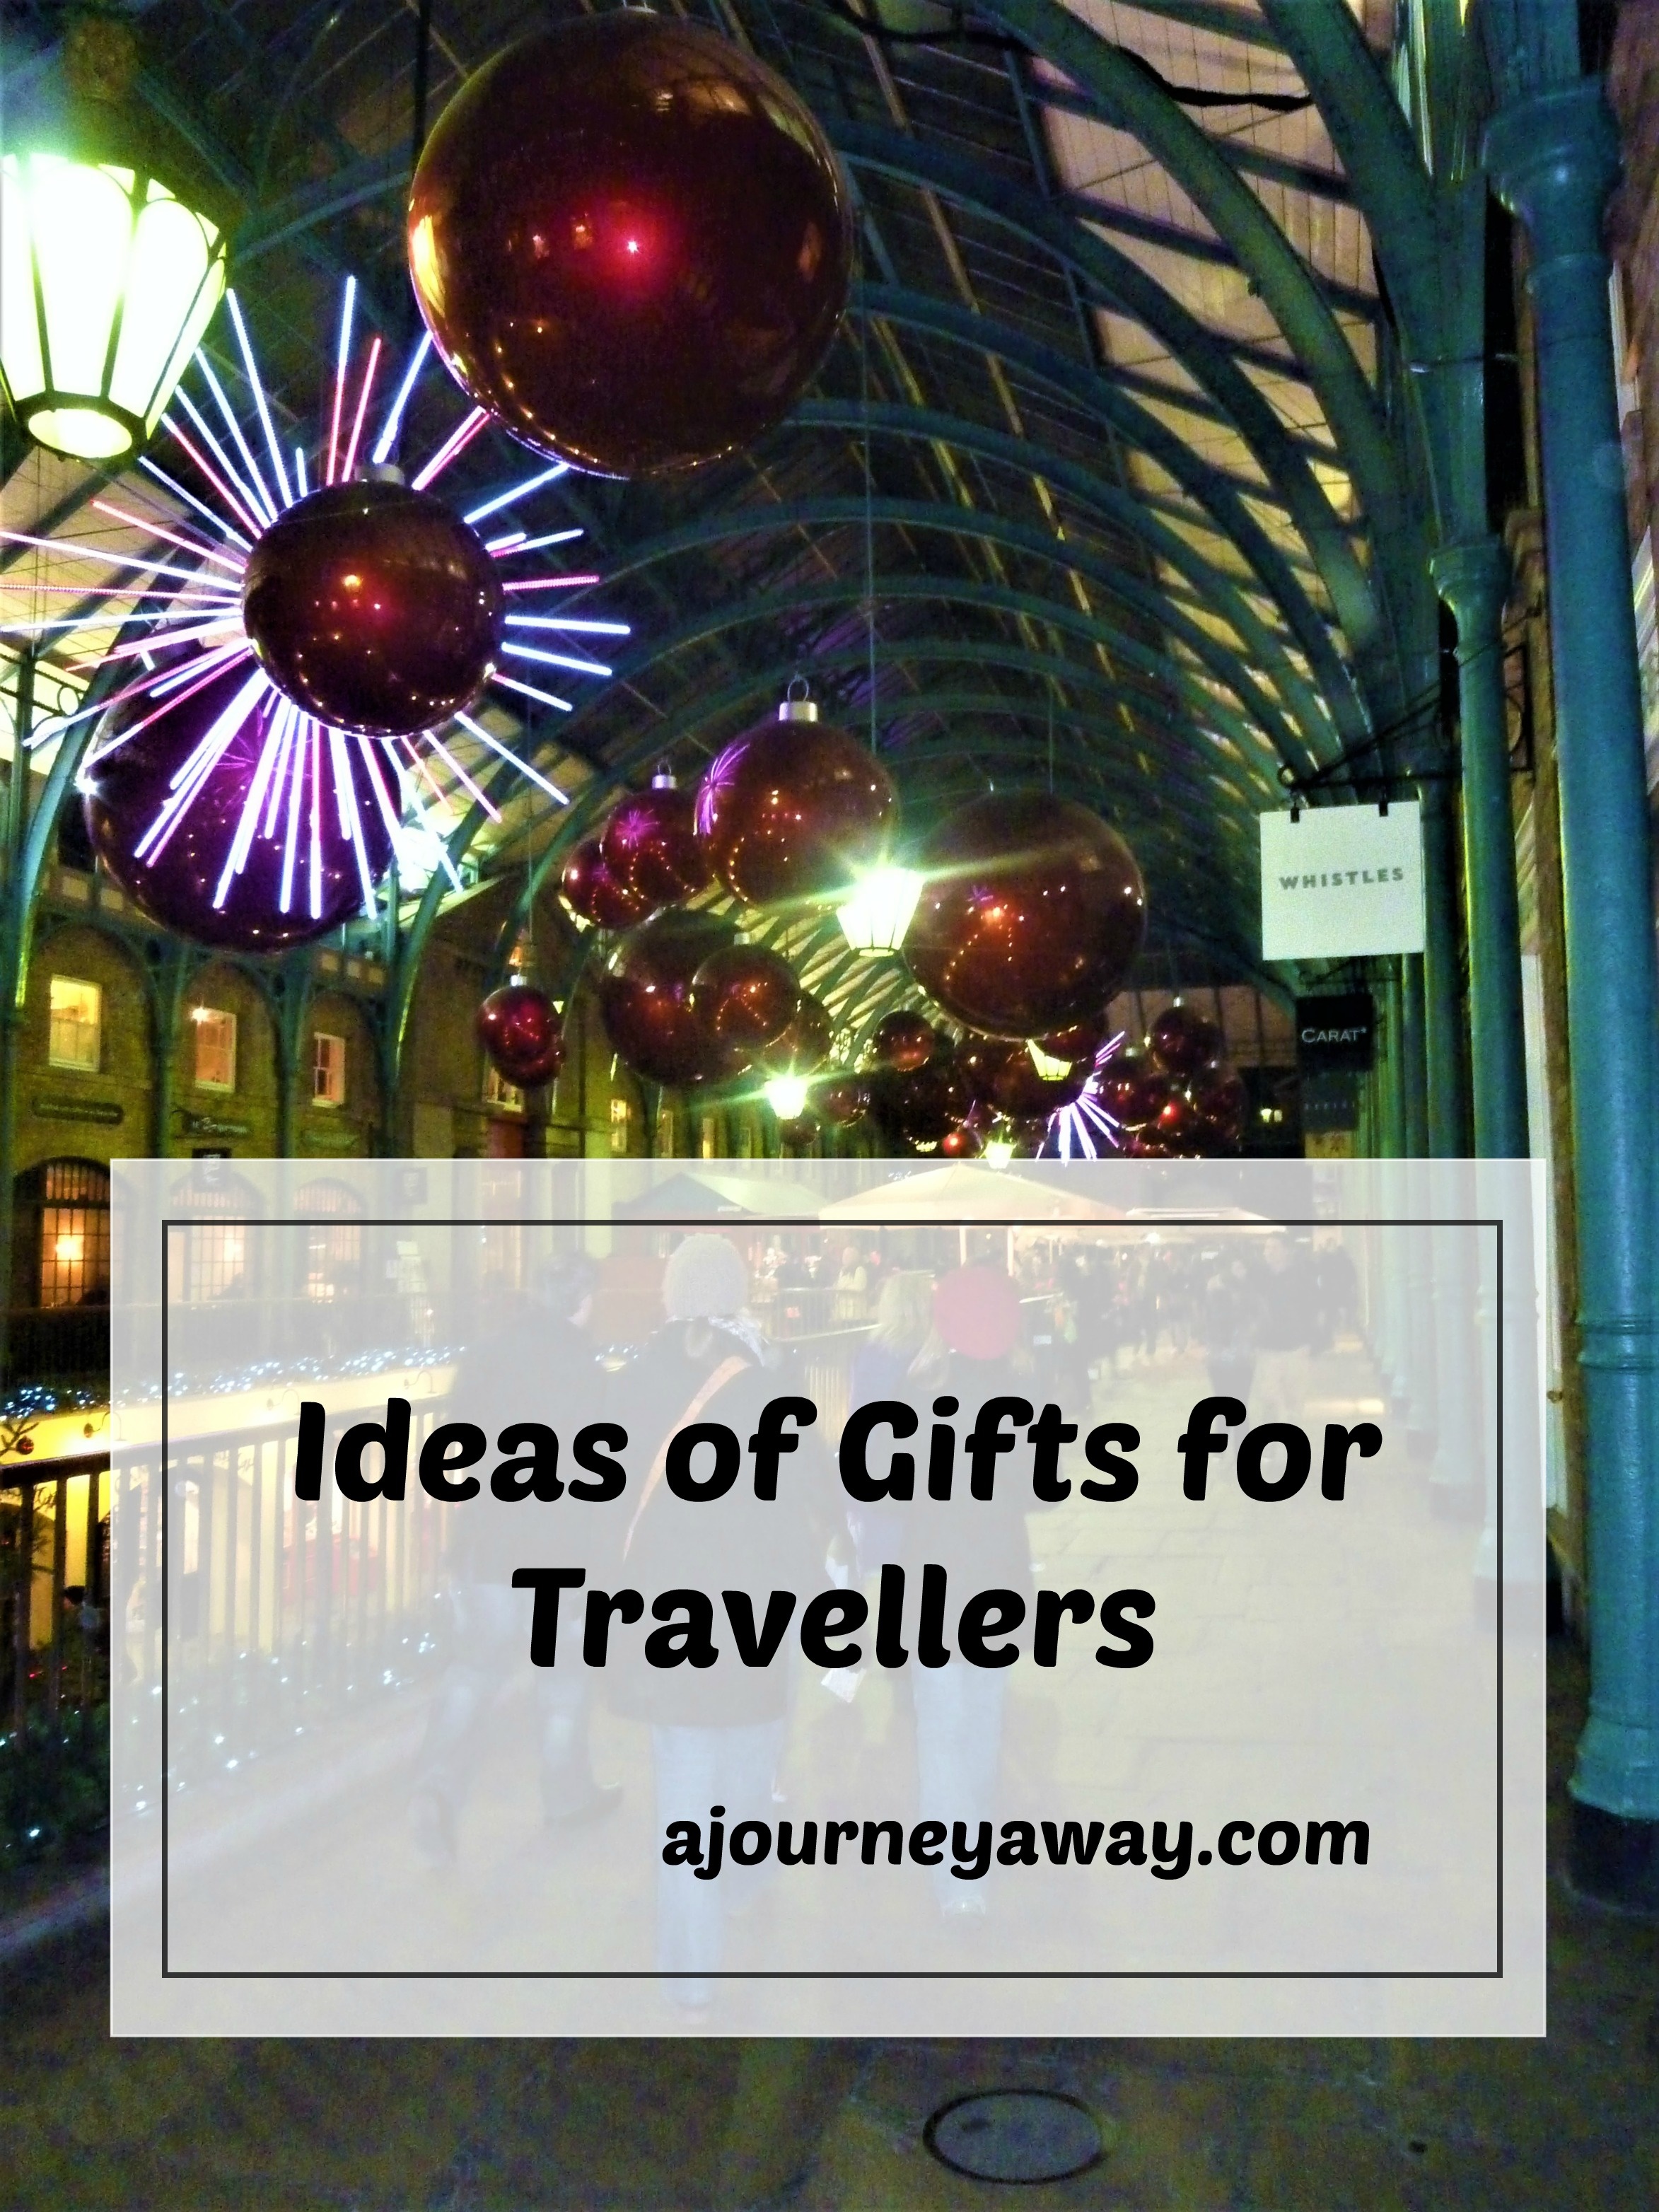 Ideas of gifts for travellers